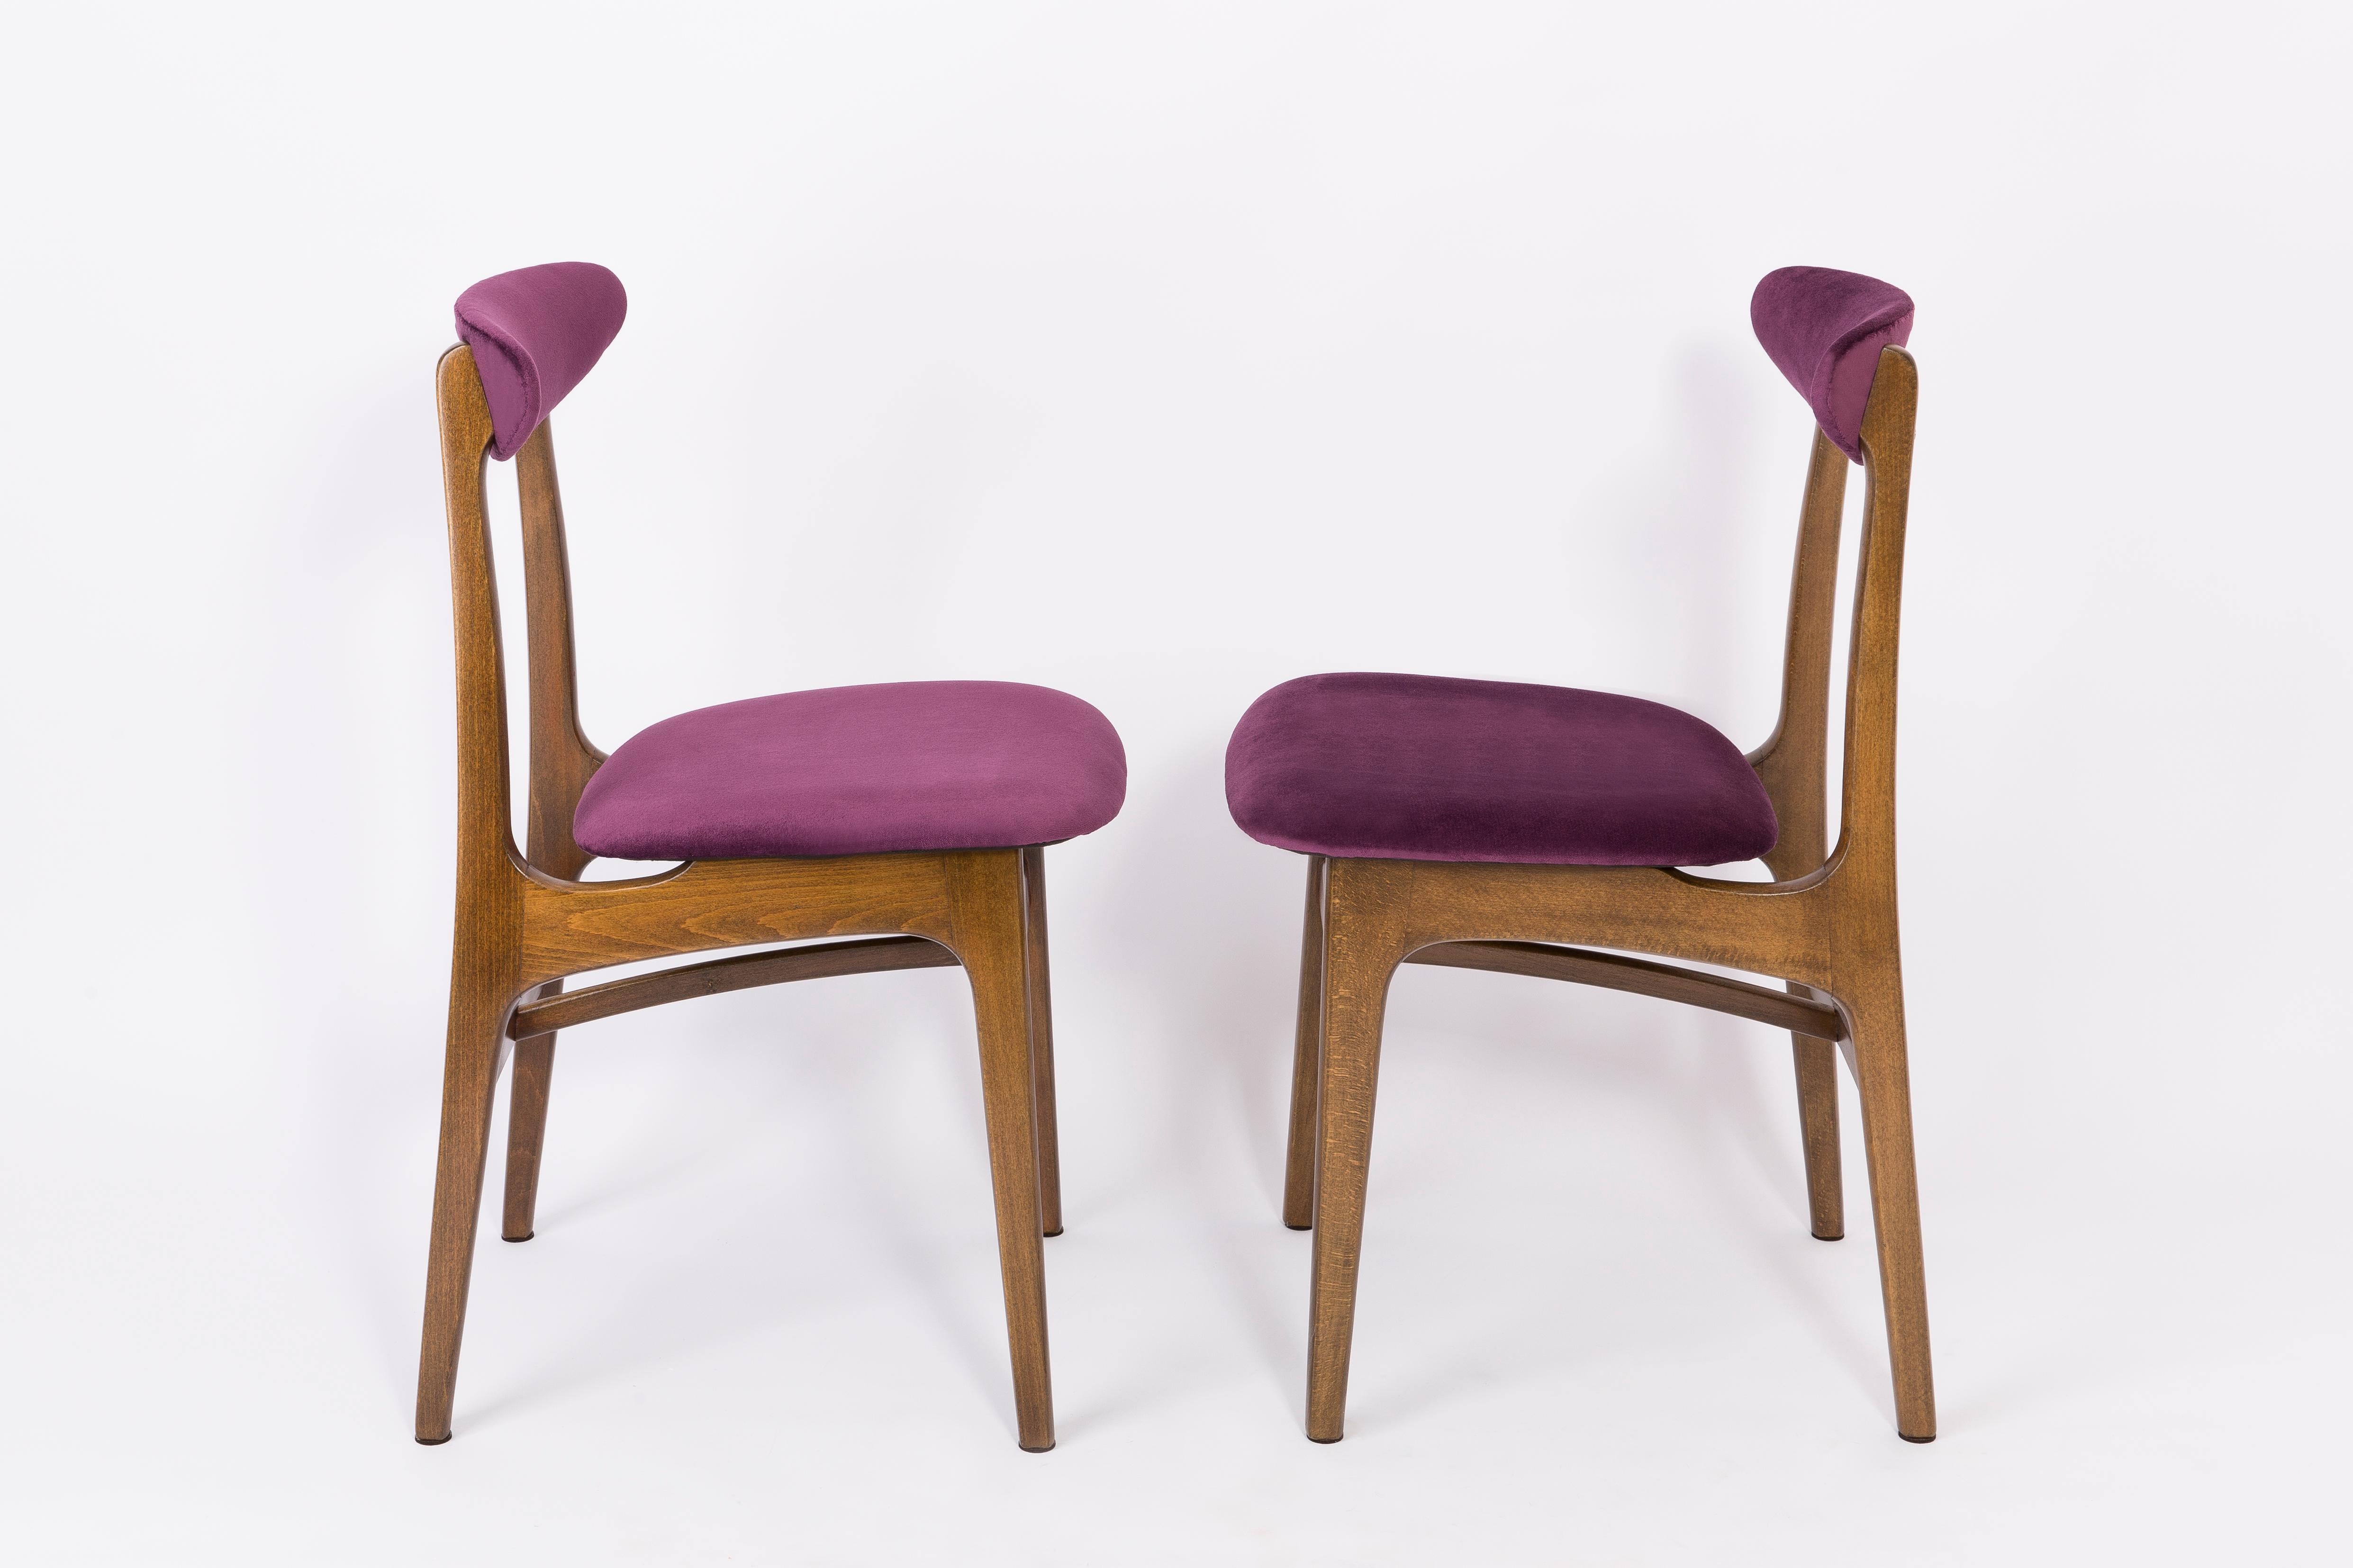 Chairs designed by Prof. Rajmund Halas. They have been made of beechwood. They have undergone a complete upholstery renovation, the woodwork has been refreshed. Seats and backs were dressed in a plum (color 969), durable and pleasant to the touch